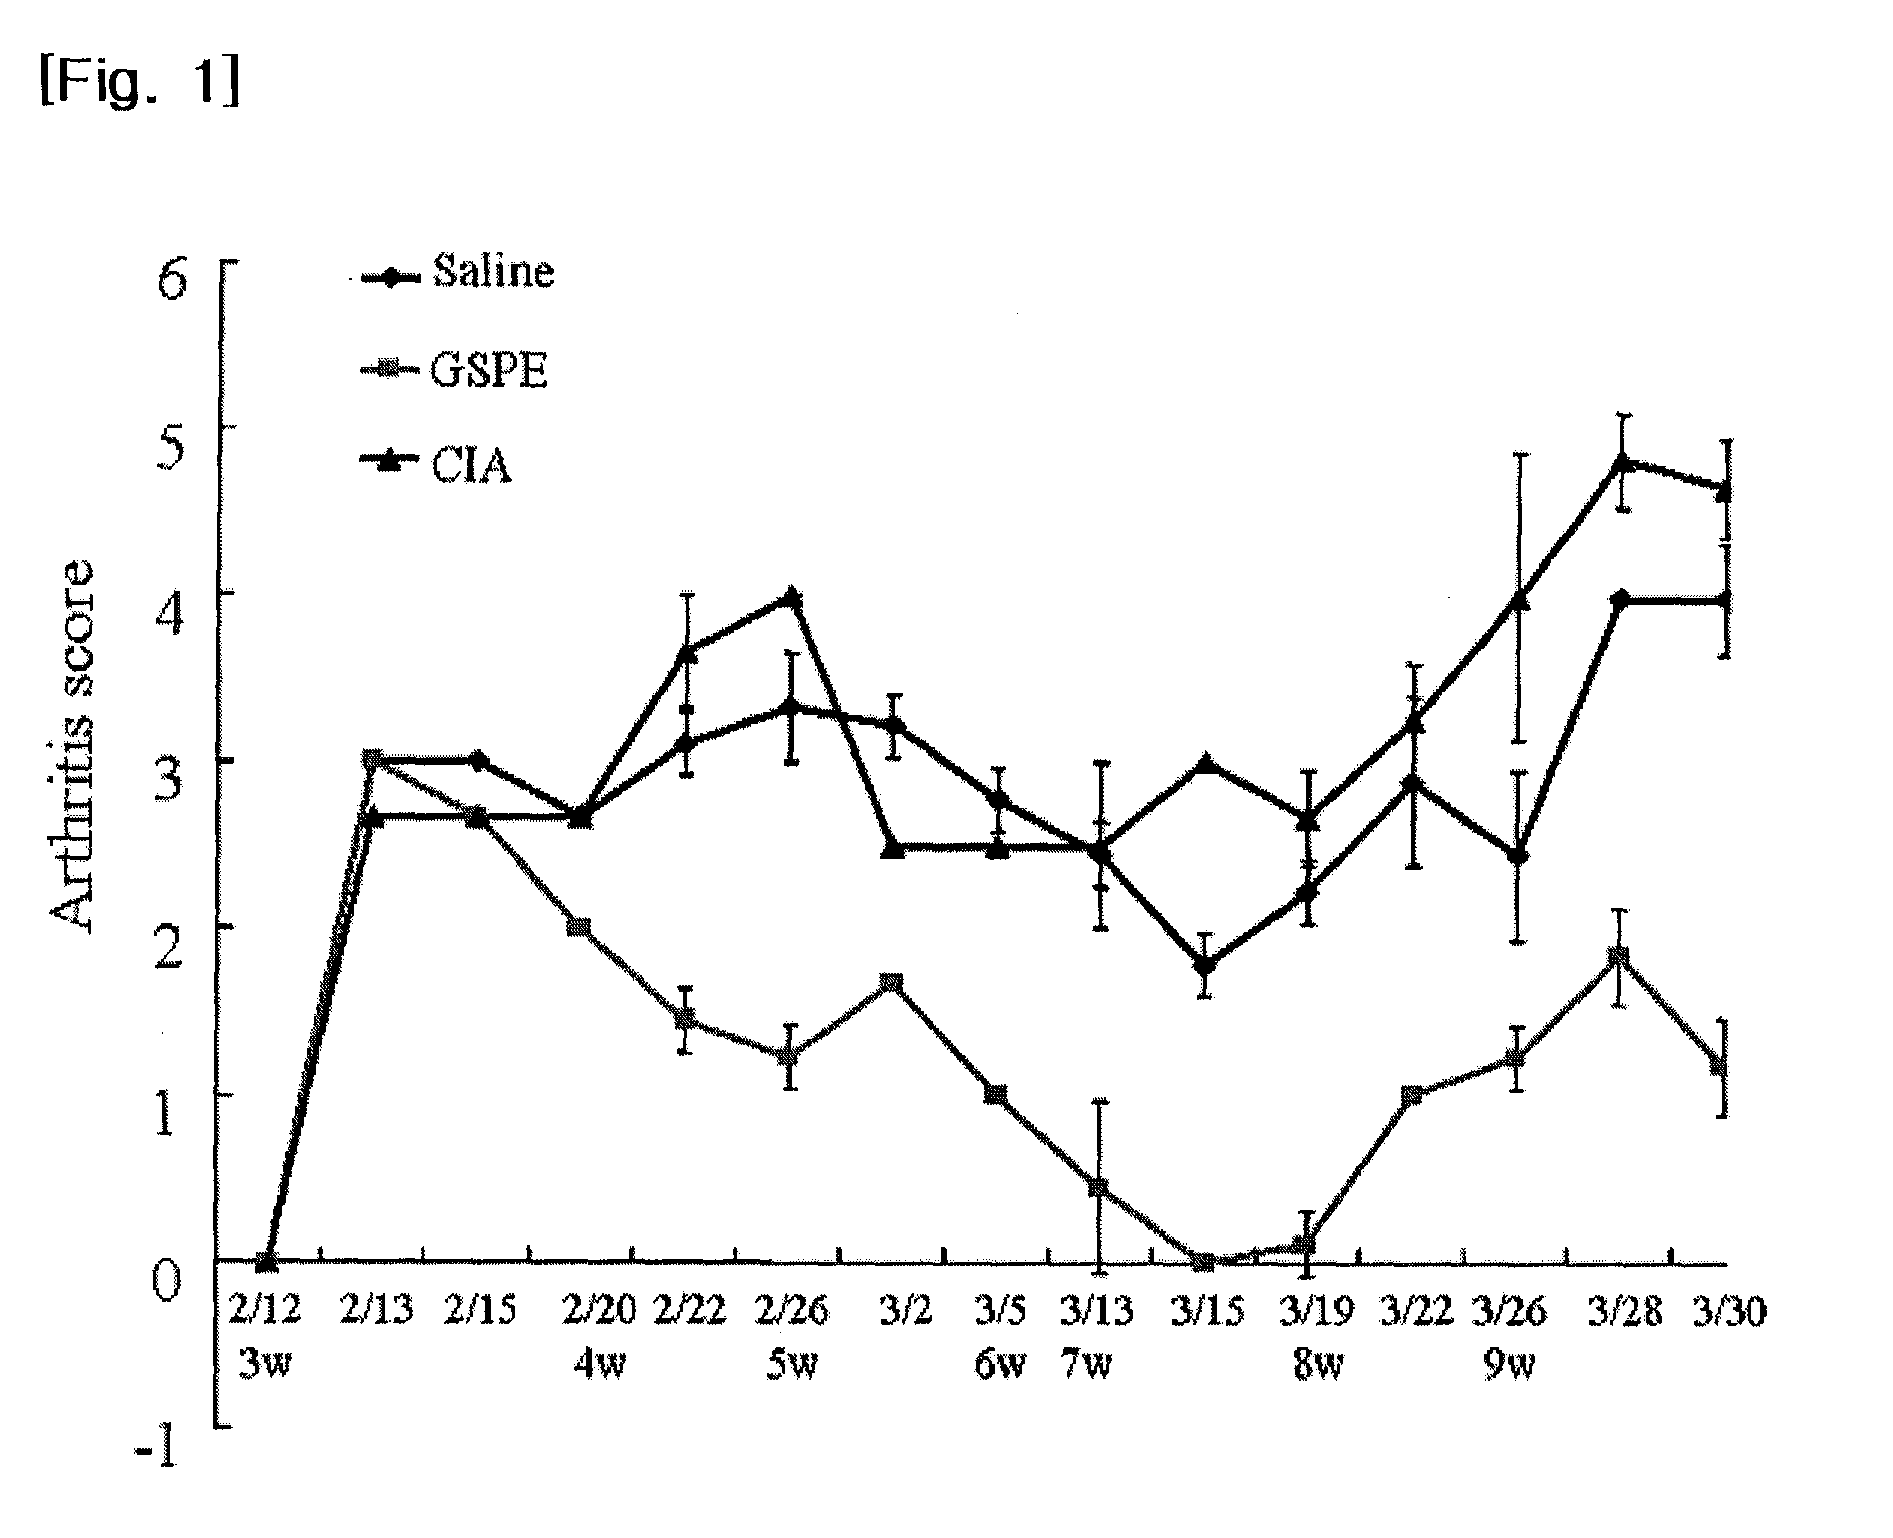 Process for preparing vitis vinifera pip extract and pharmaceutical composition for preventing or treating rheumatoid arthritis comprising the same